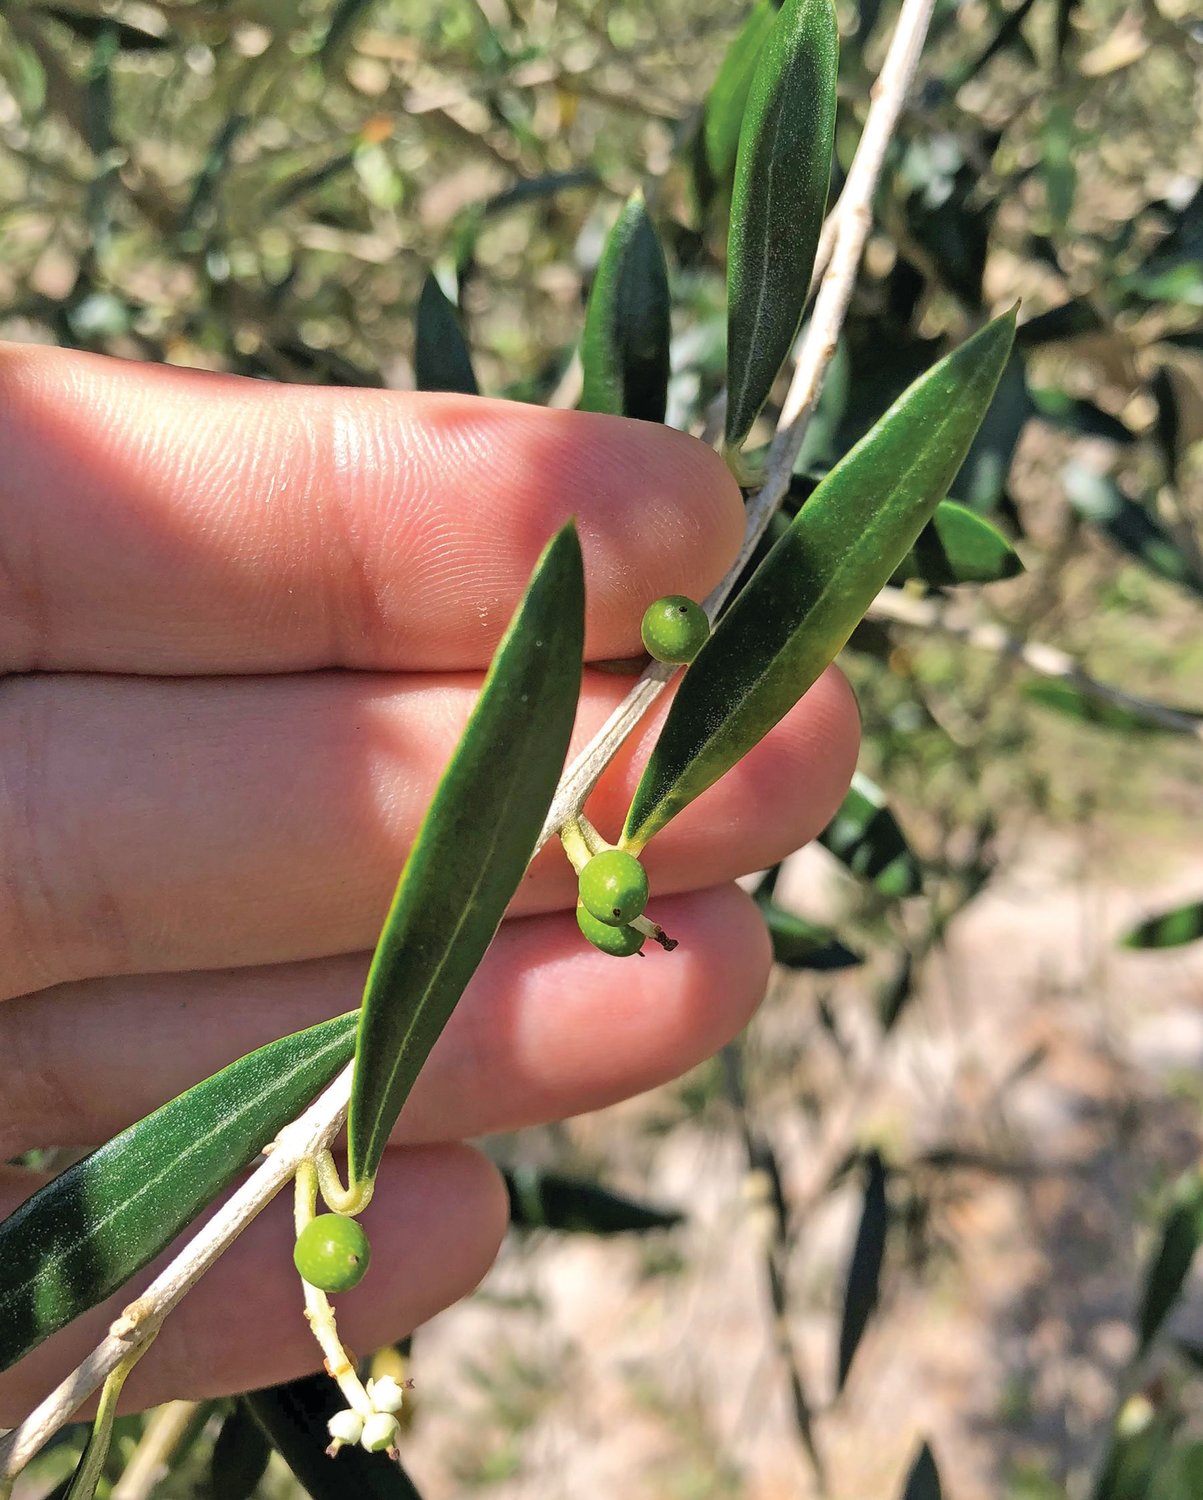 Young olives on an experimental tree in Florida.